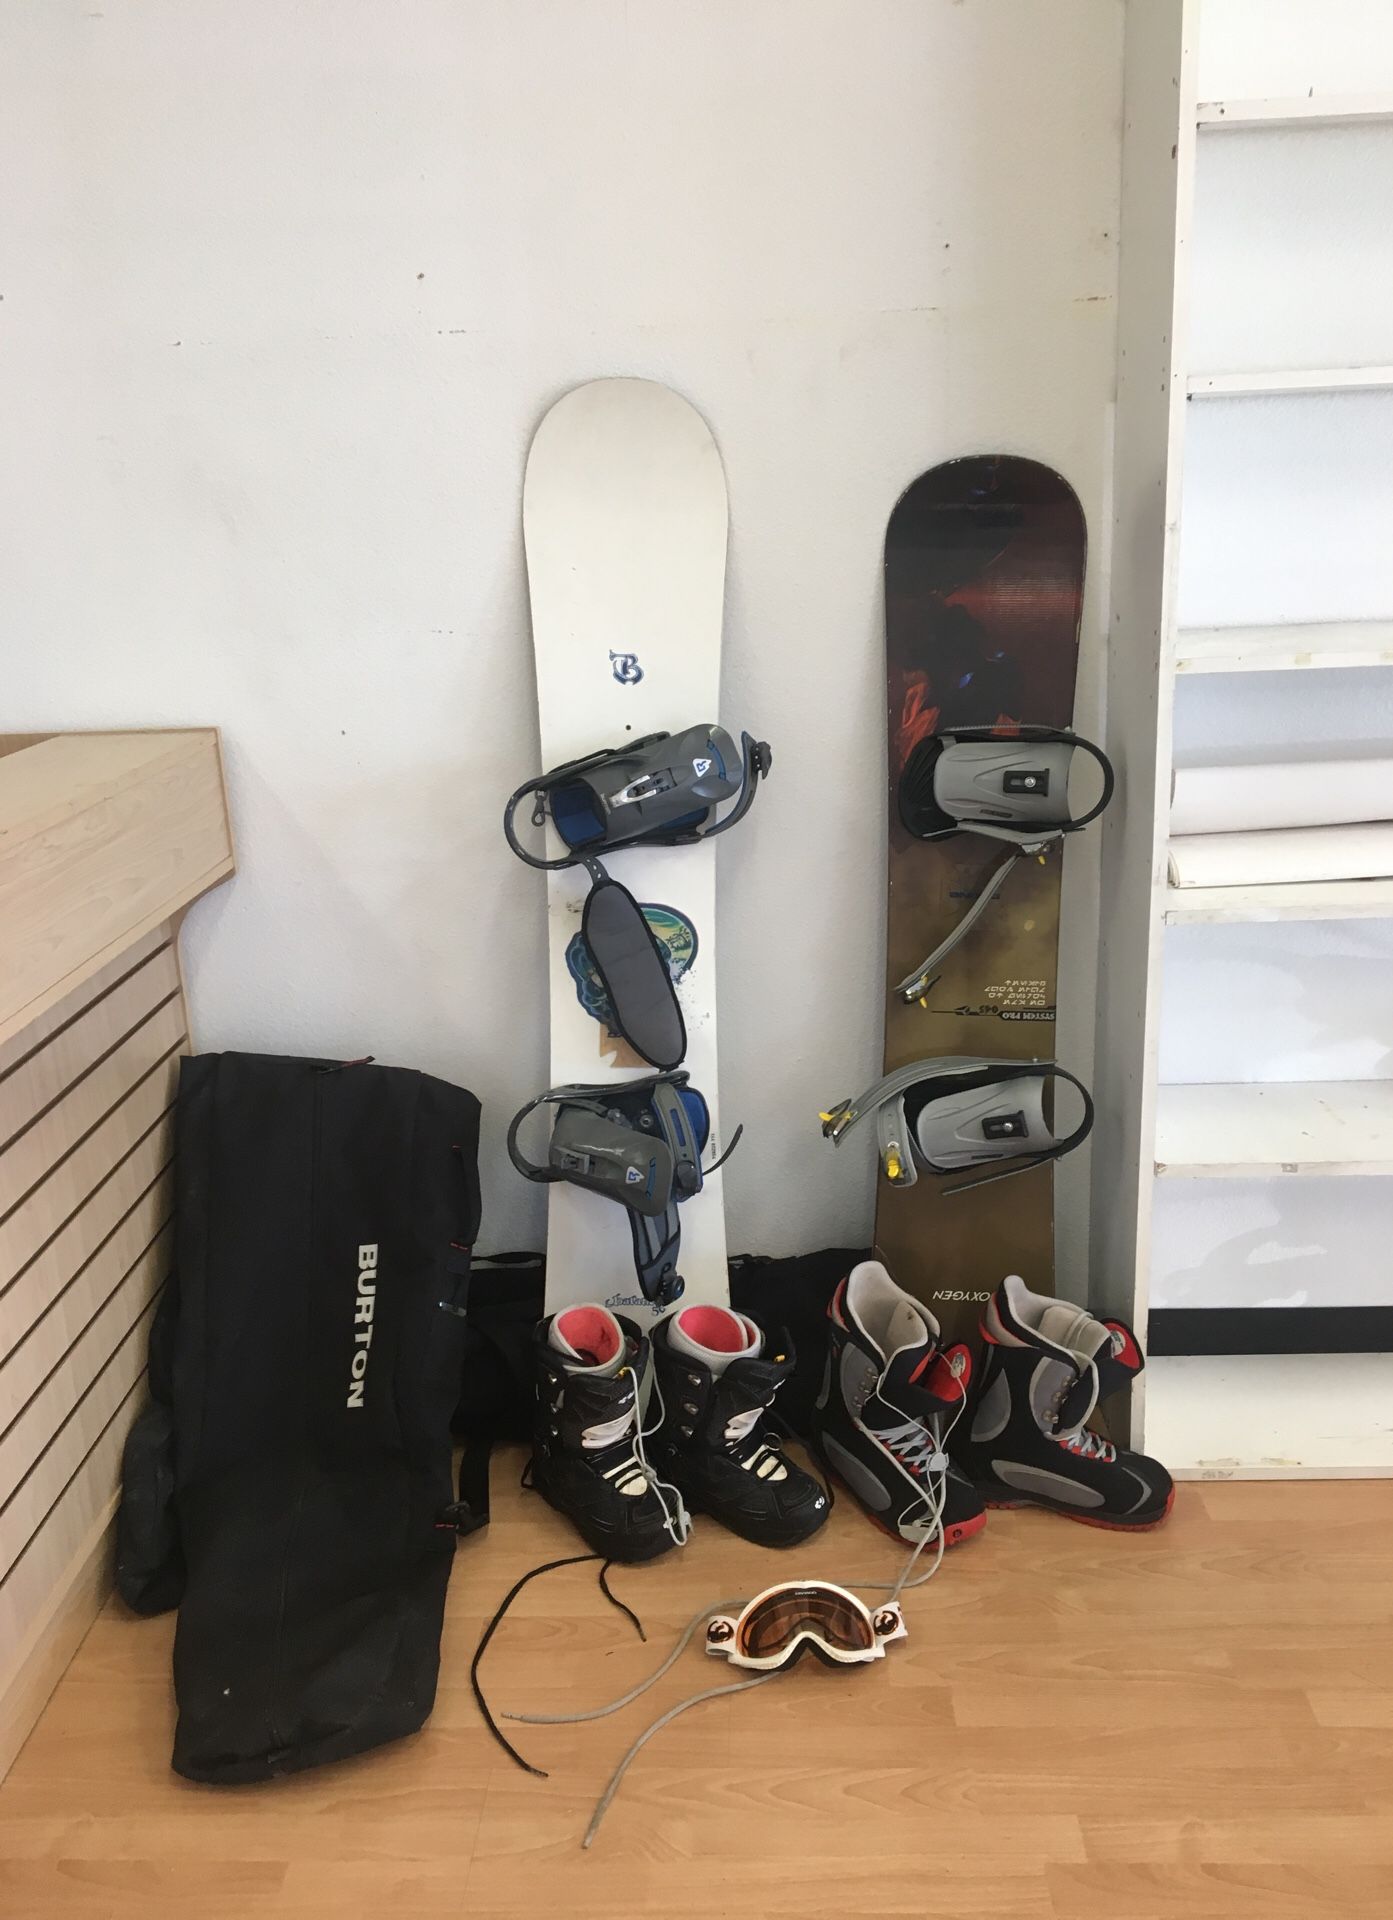 2 snowboards w/bags & shoes